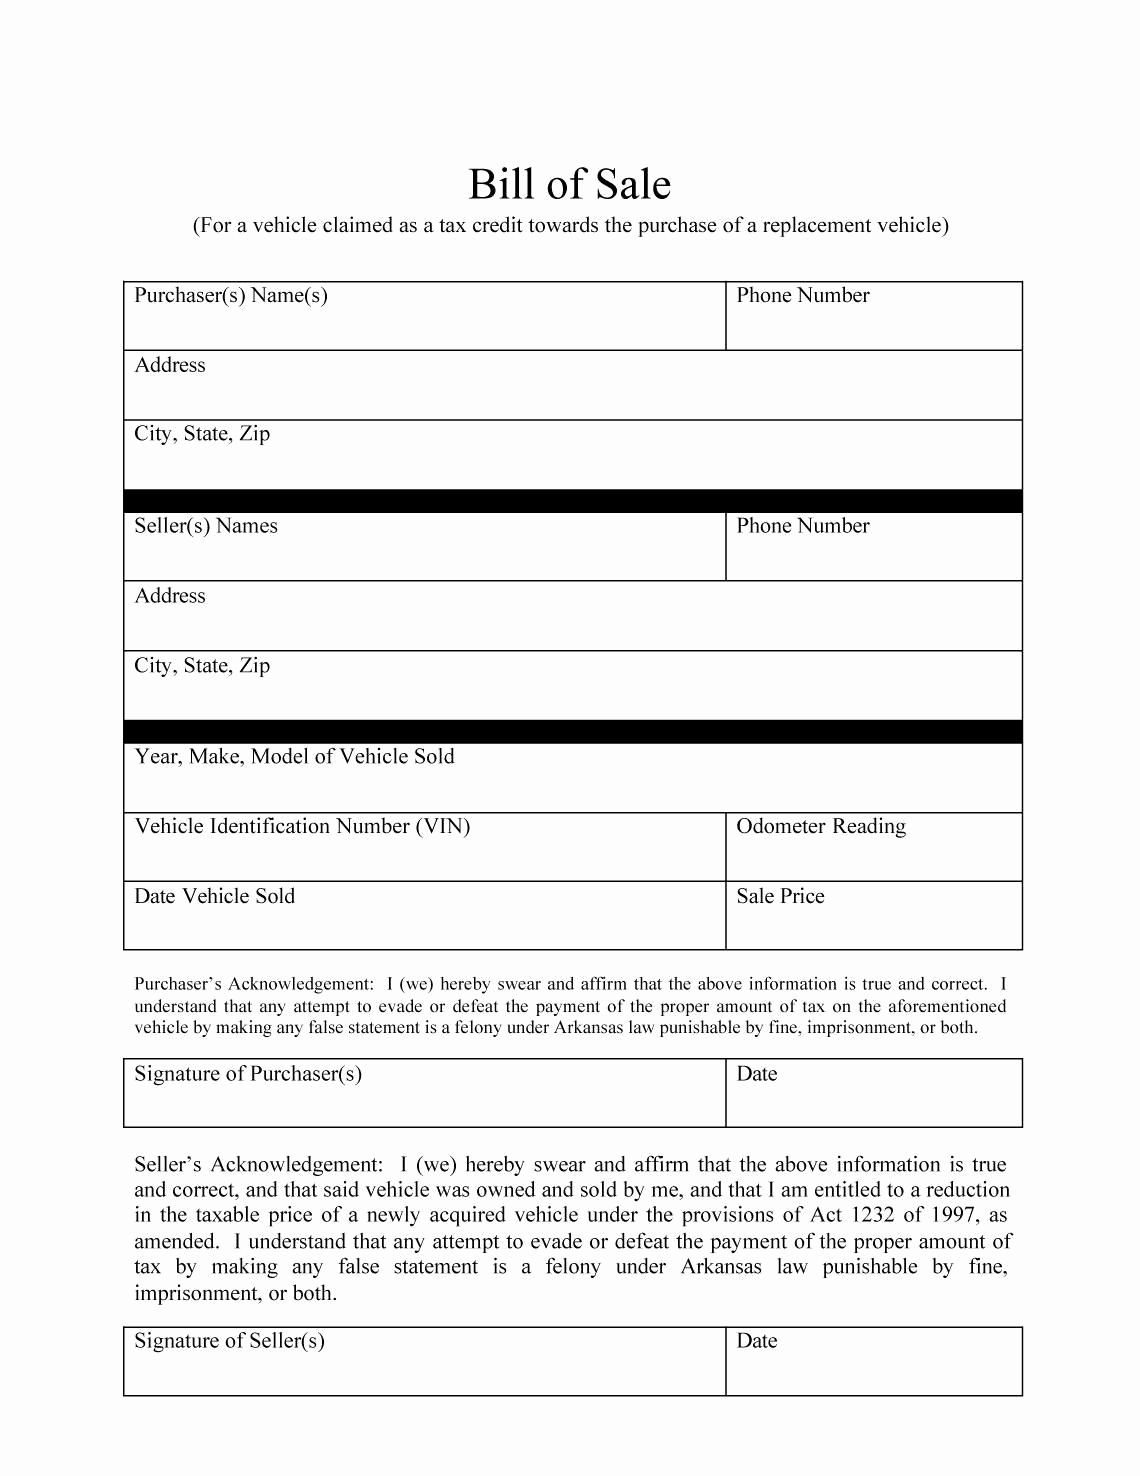 Free Vehicle Bill Of Sale Awesome 46 Fee Printable Bill Of Sale Templates Car Boat Gun